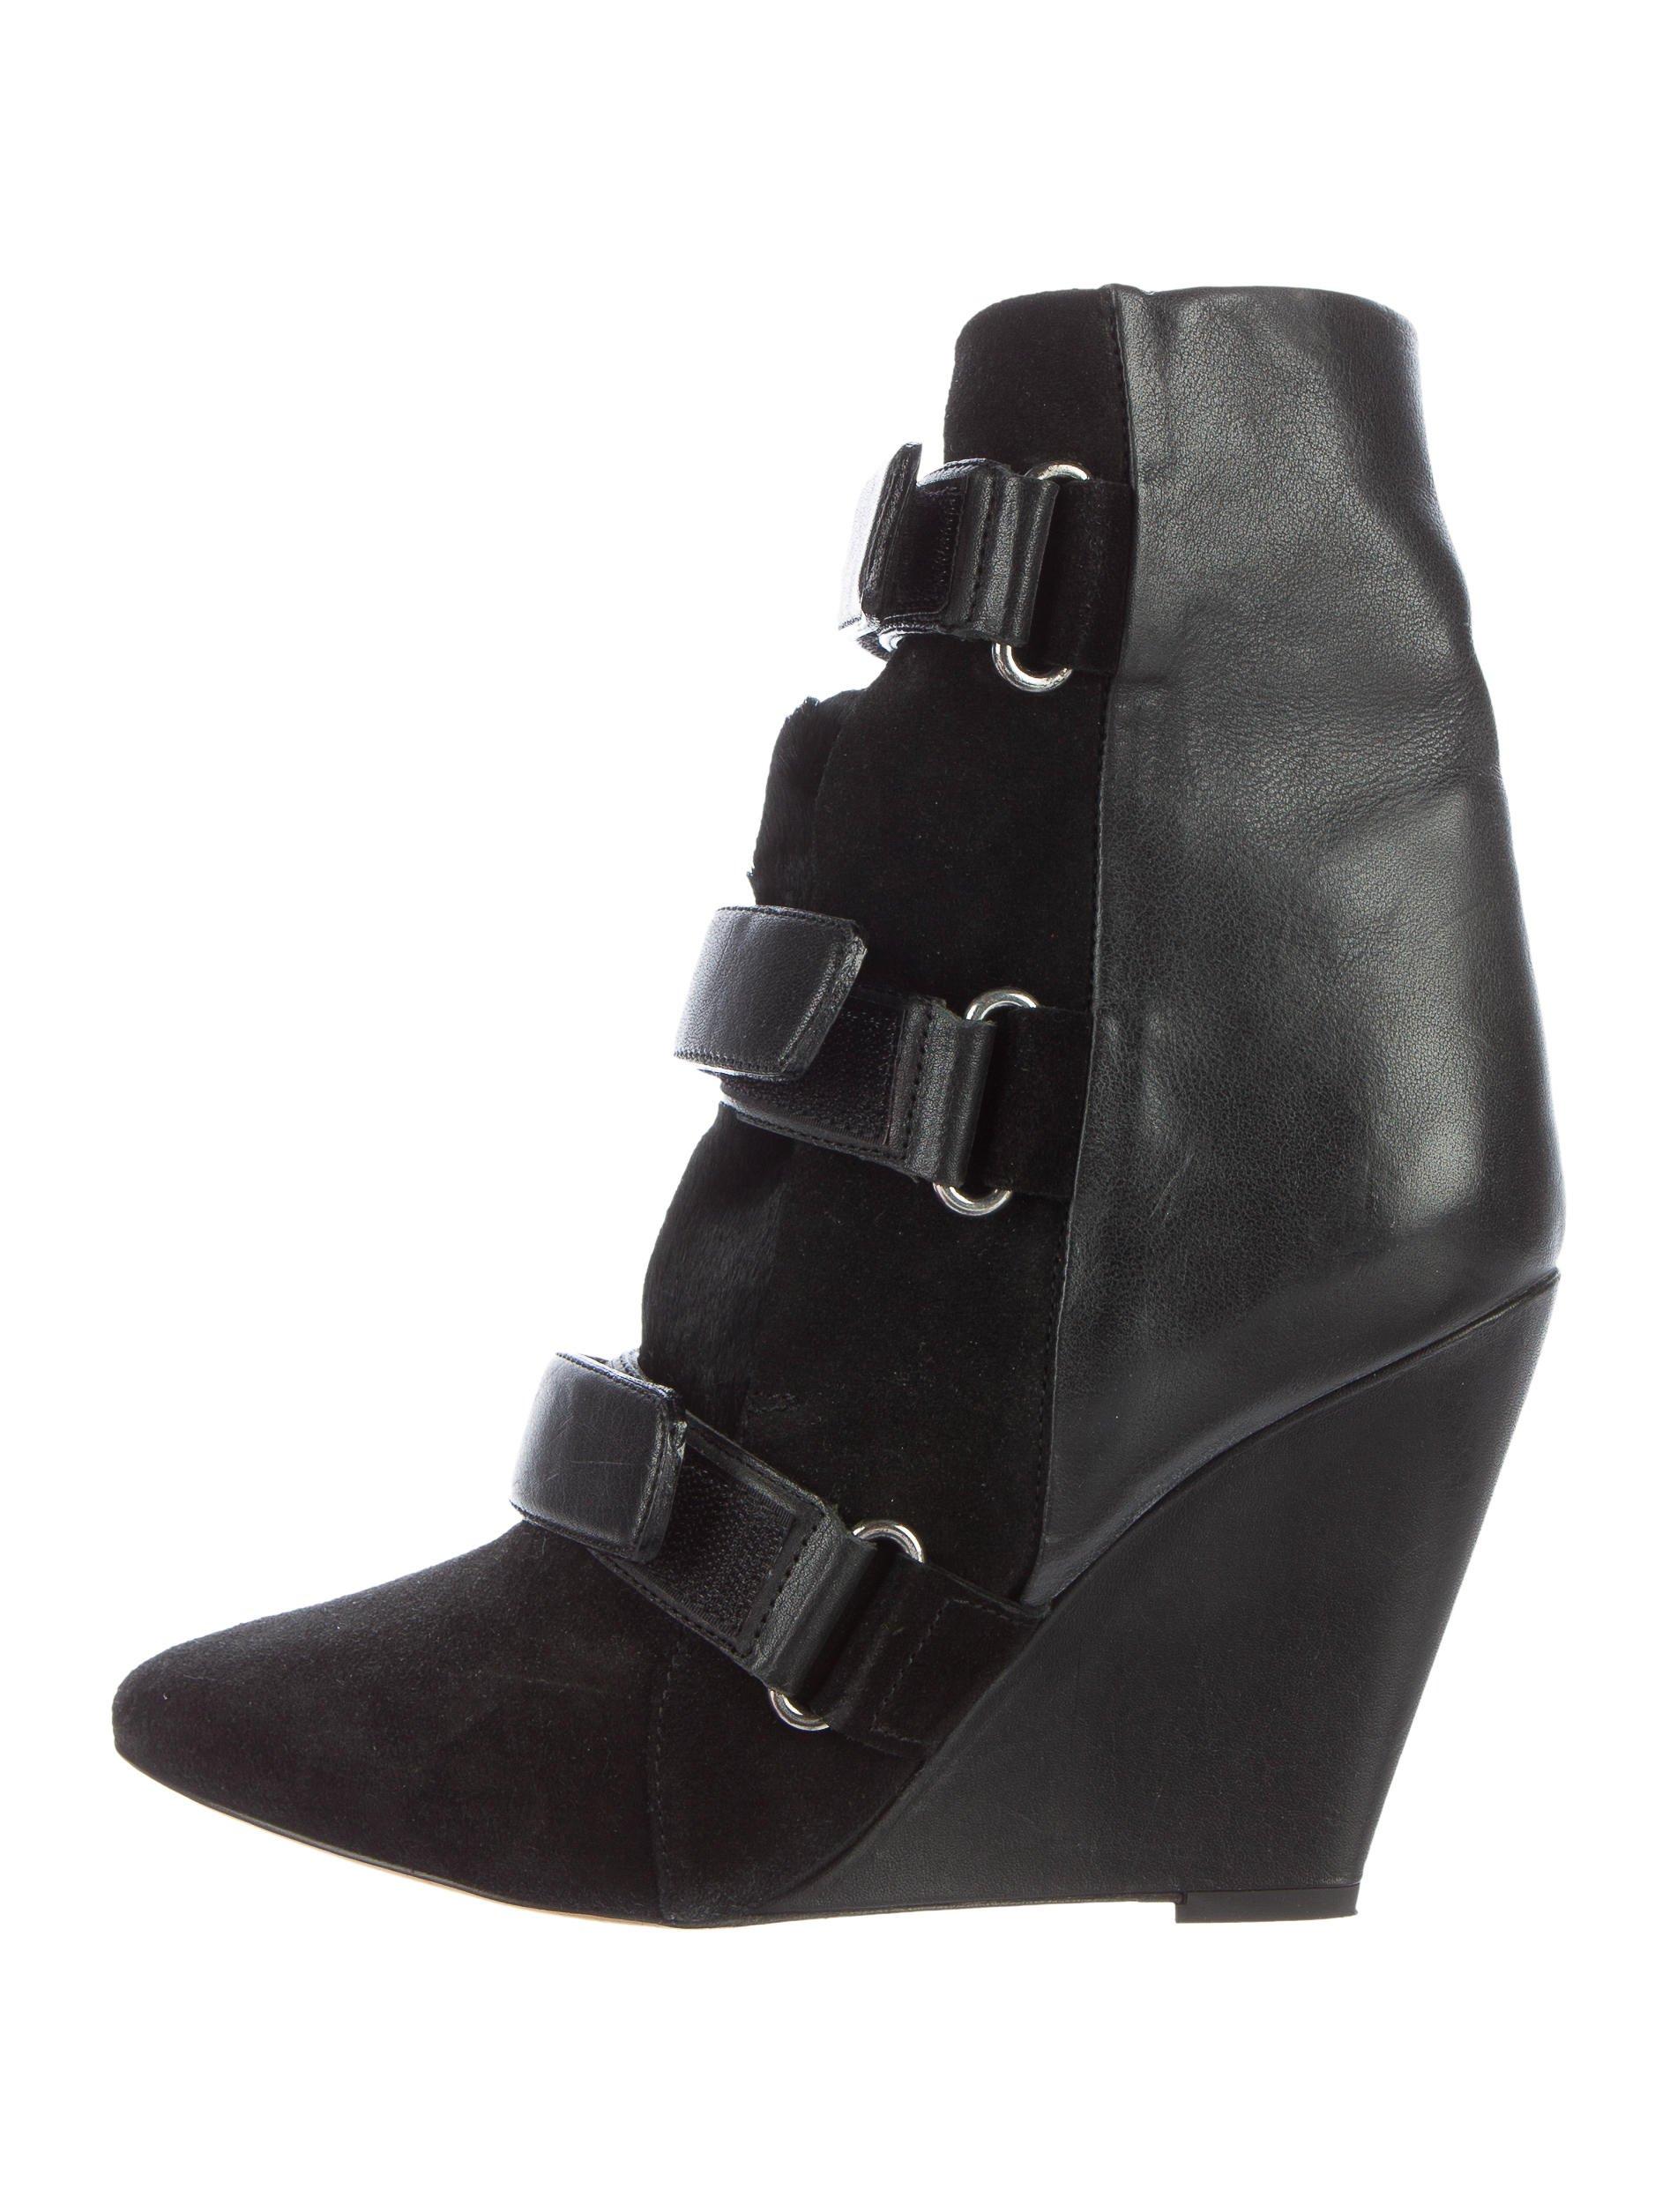 Lyst - Isabel Marant Ankle Boots in Black